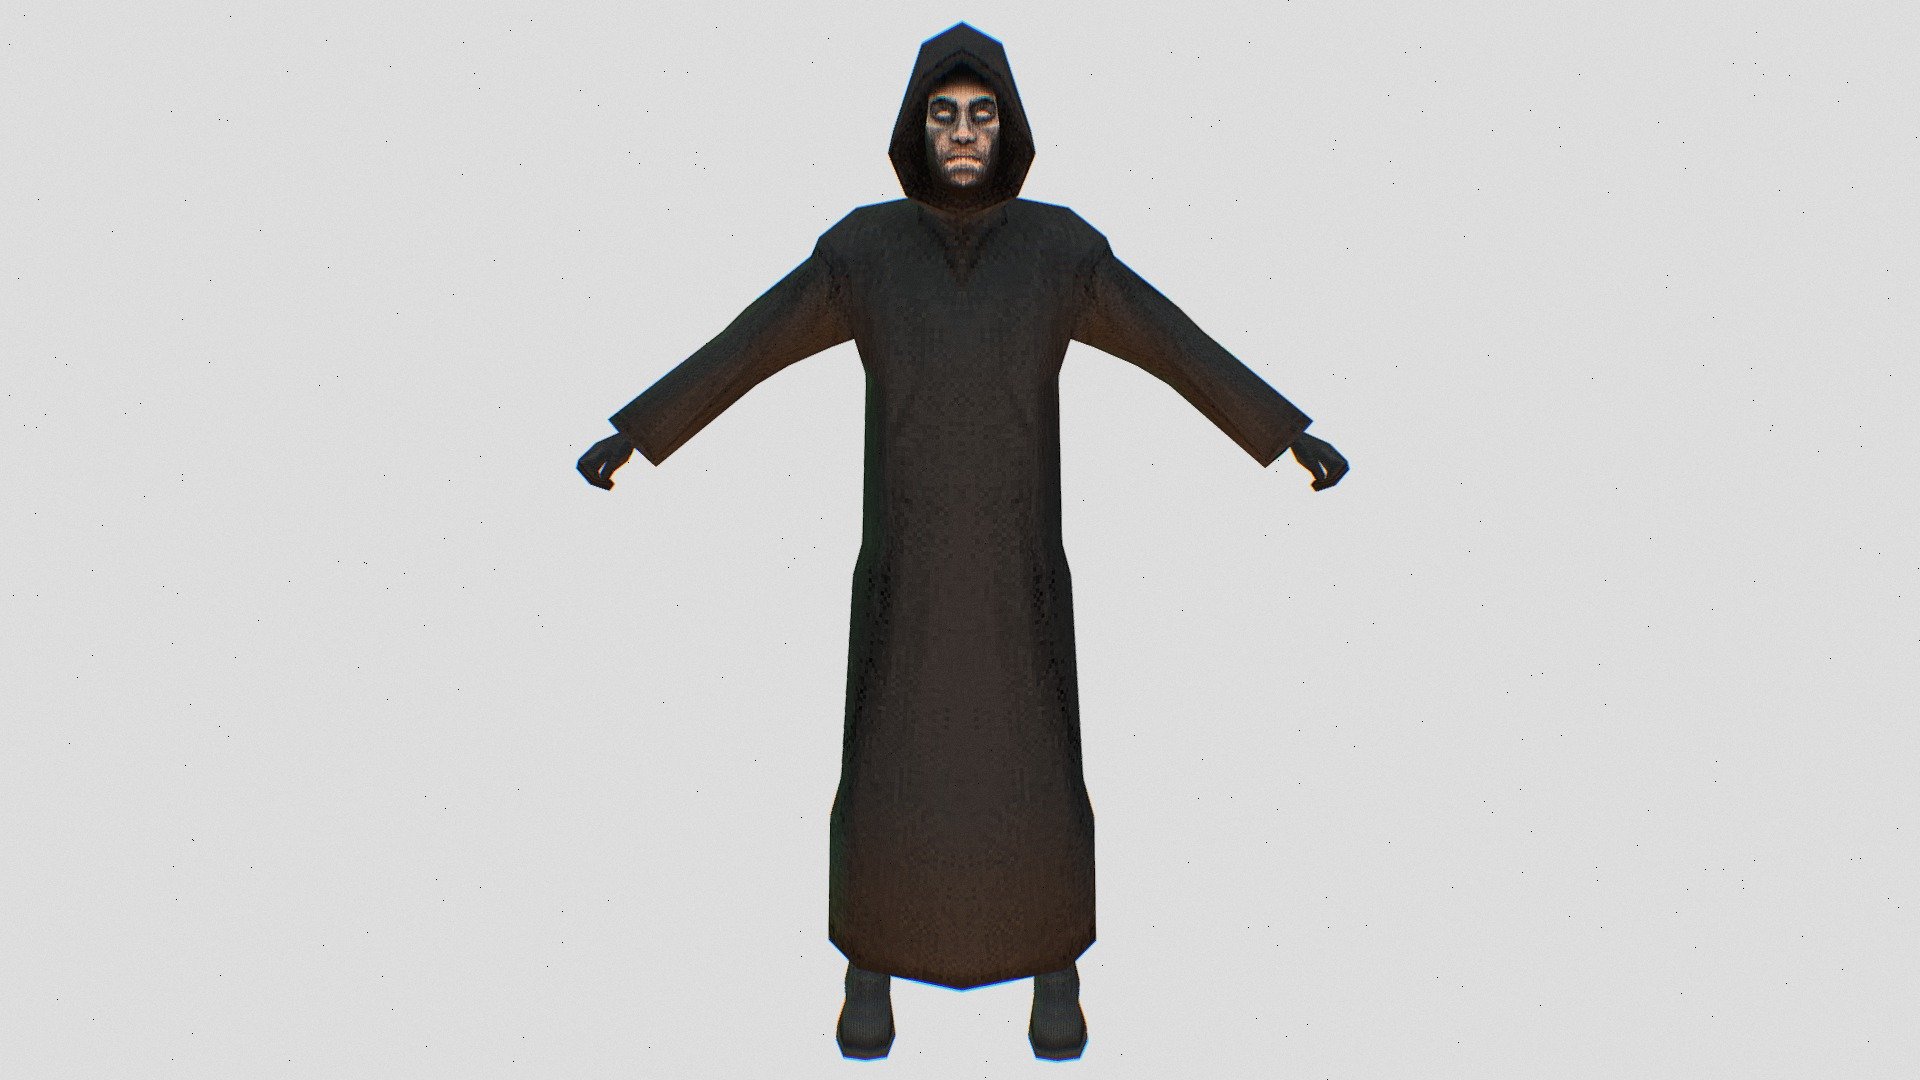 This is a cult gang member from my game.

Designed for retro inspired projects or mobile games.

My YouTube channel where I document my game dev journey - https://www.youtube.com/@AaronMYoung
Contact me on - Aaronmyoung94@gmail.com - PS1 Style Character - Cultist - 3D model by AaronMYoung 3d model